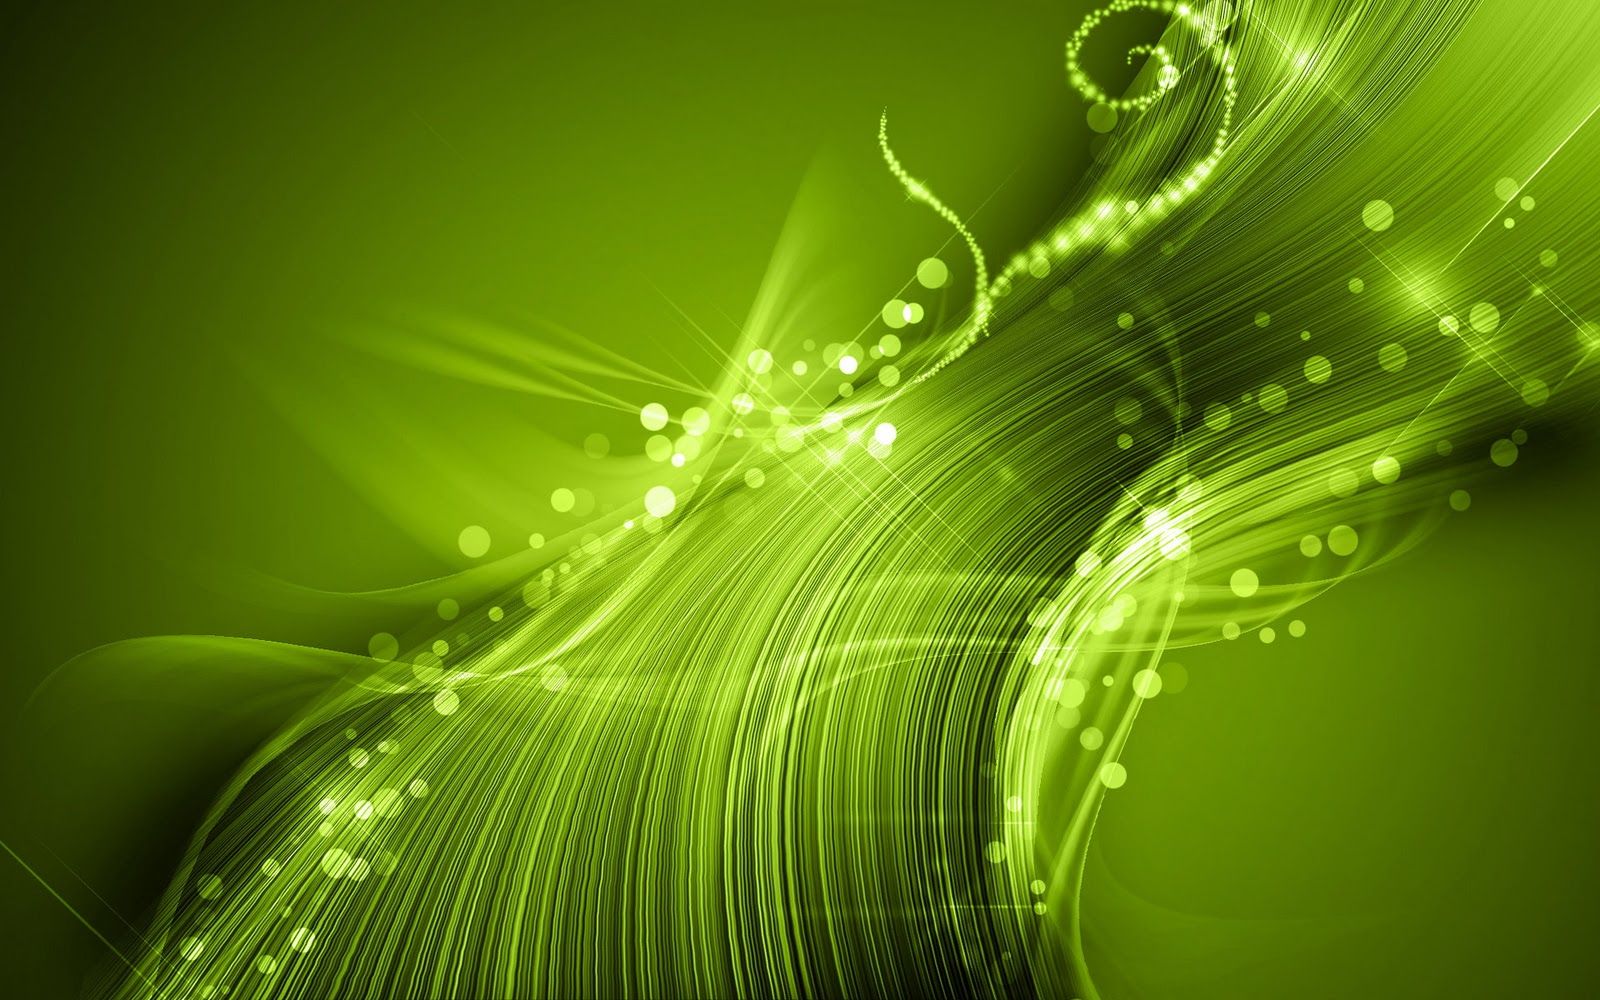 1600x1000 Free Download Cool Green Lights Full Hd Wallpaper 1600x1000 For Your Desktop Mobile Tablet Explore Cool Green Wallpaper Green Black Wallpaper Green Wallpaper For My Desktop Green Hd Wallpaper